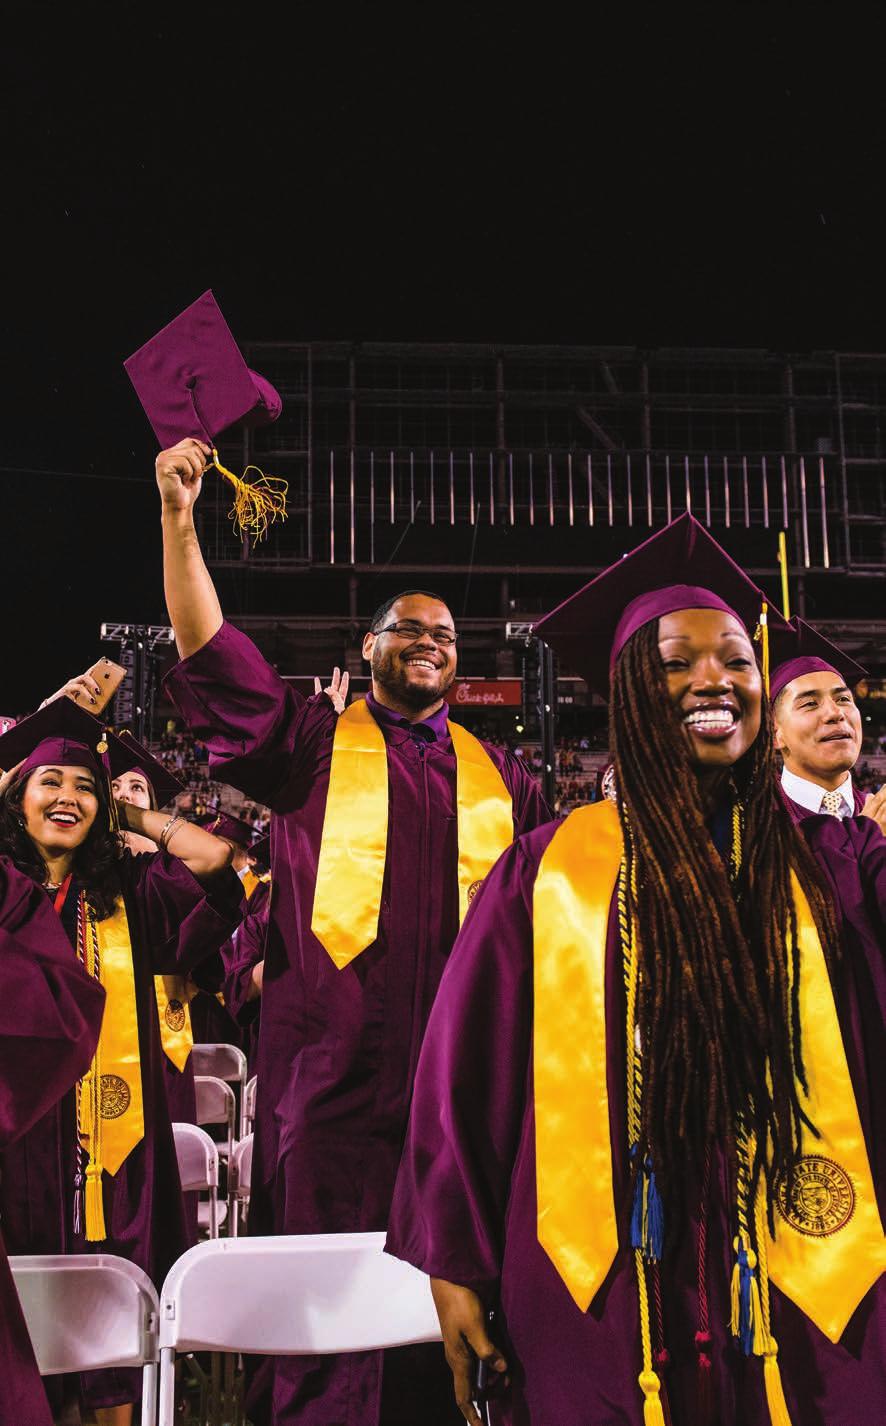 Fueling their dreams Sun Devil Family Association Fund When parents join the SDFA Leadership Council, their gifts support the Sun Devil Family Association Fund, which enables important studentsuccess